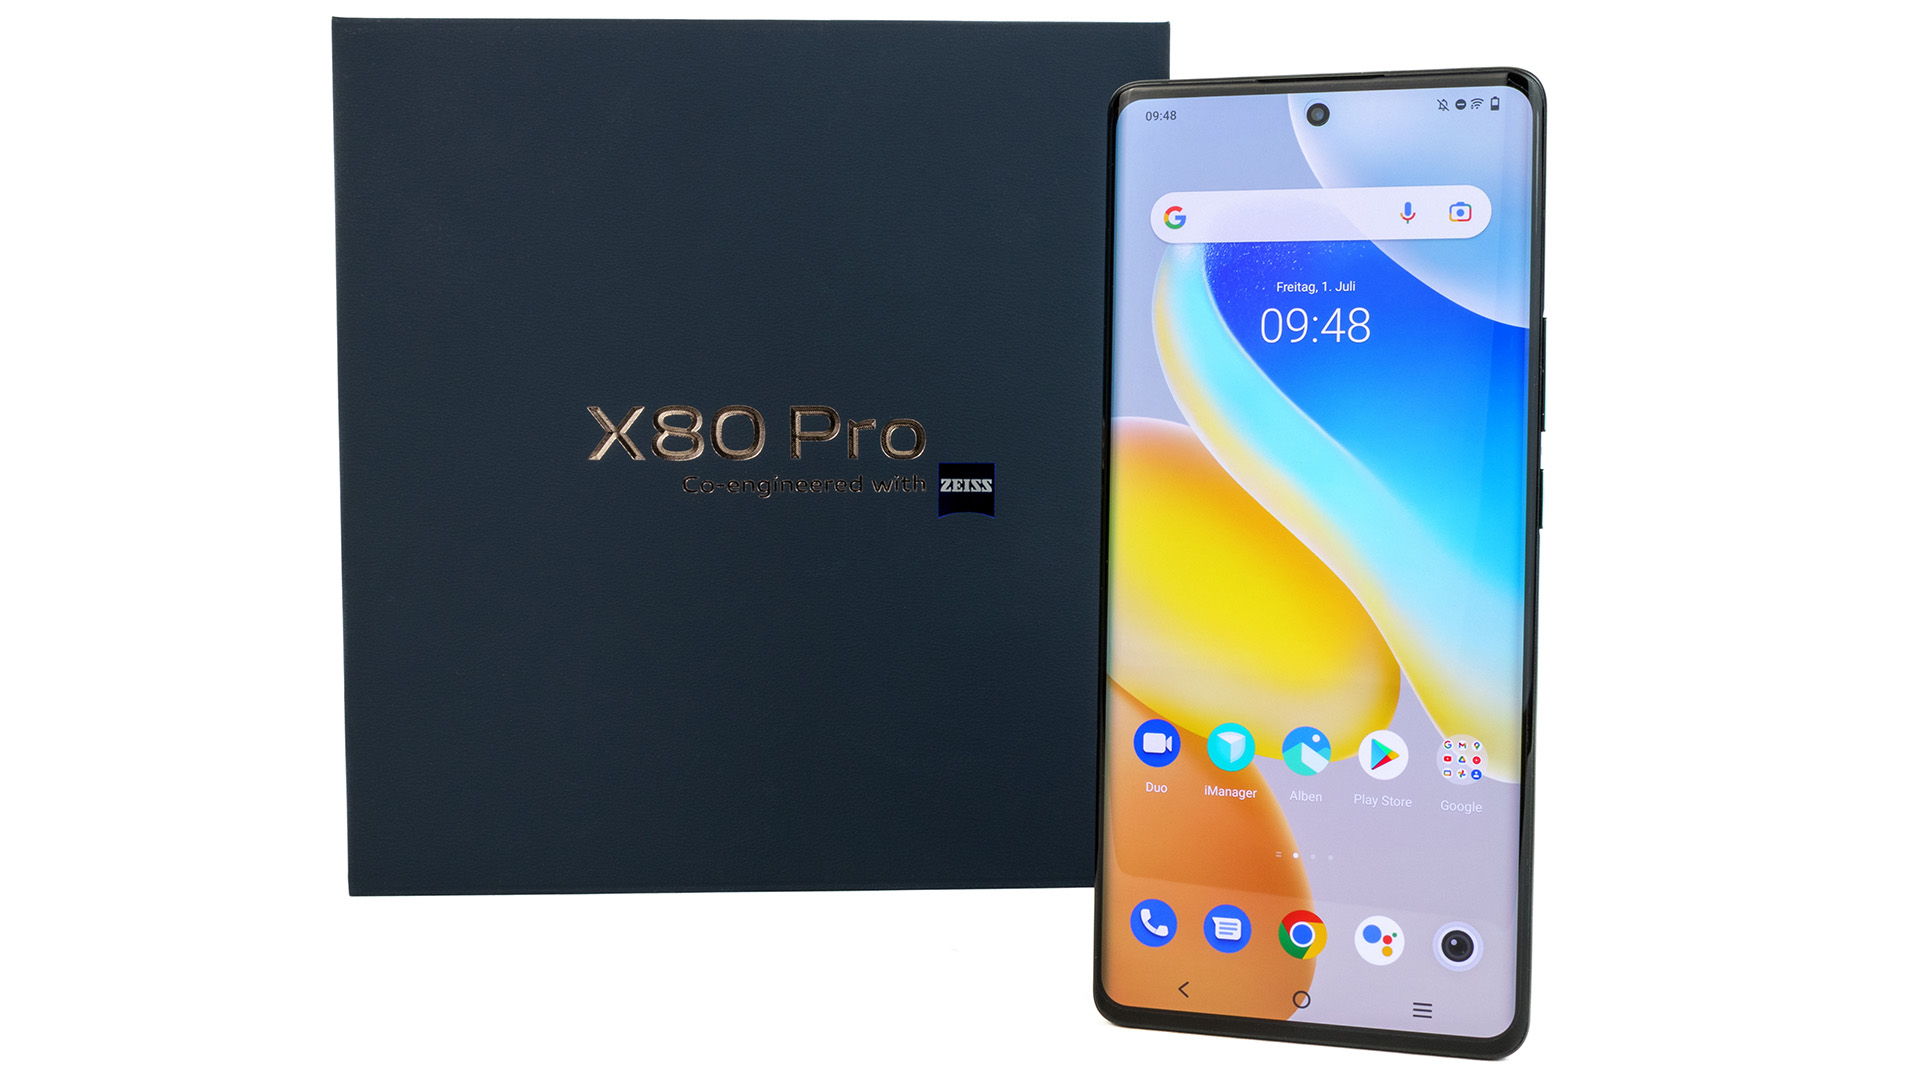 Vivo X80 Pro: specs, benchmarks, and user reviews